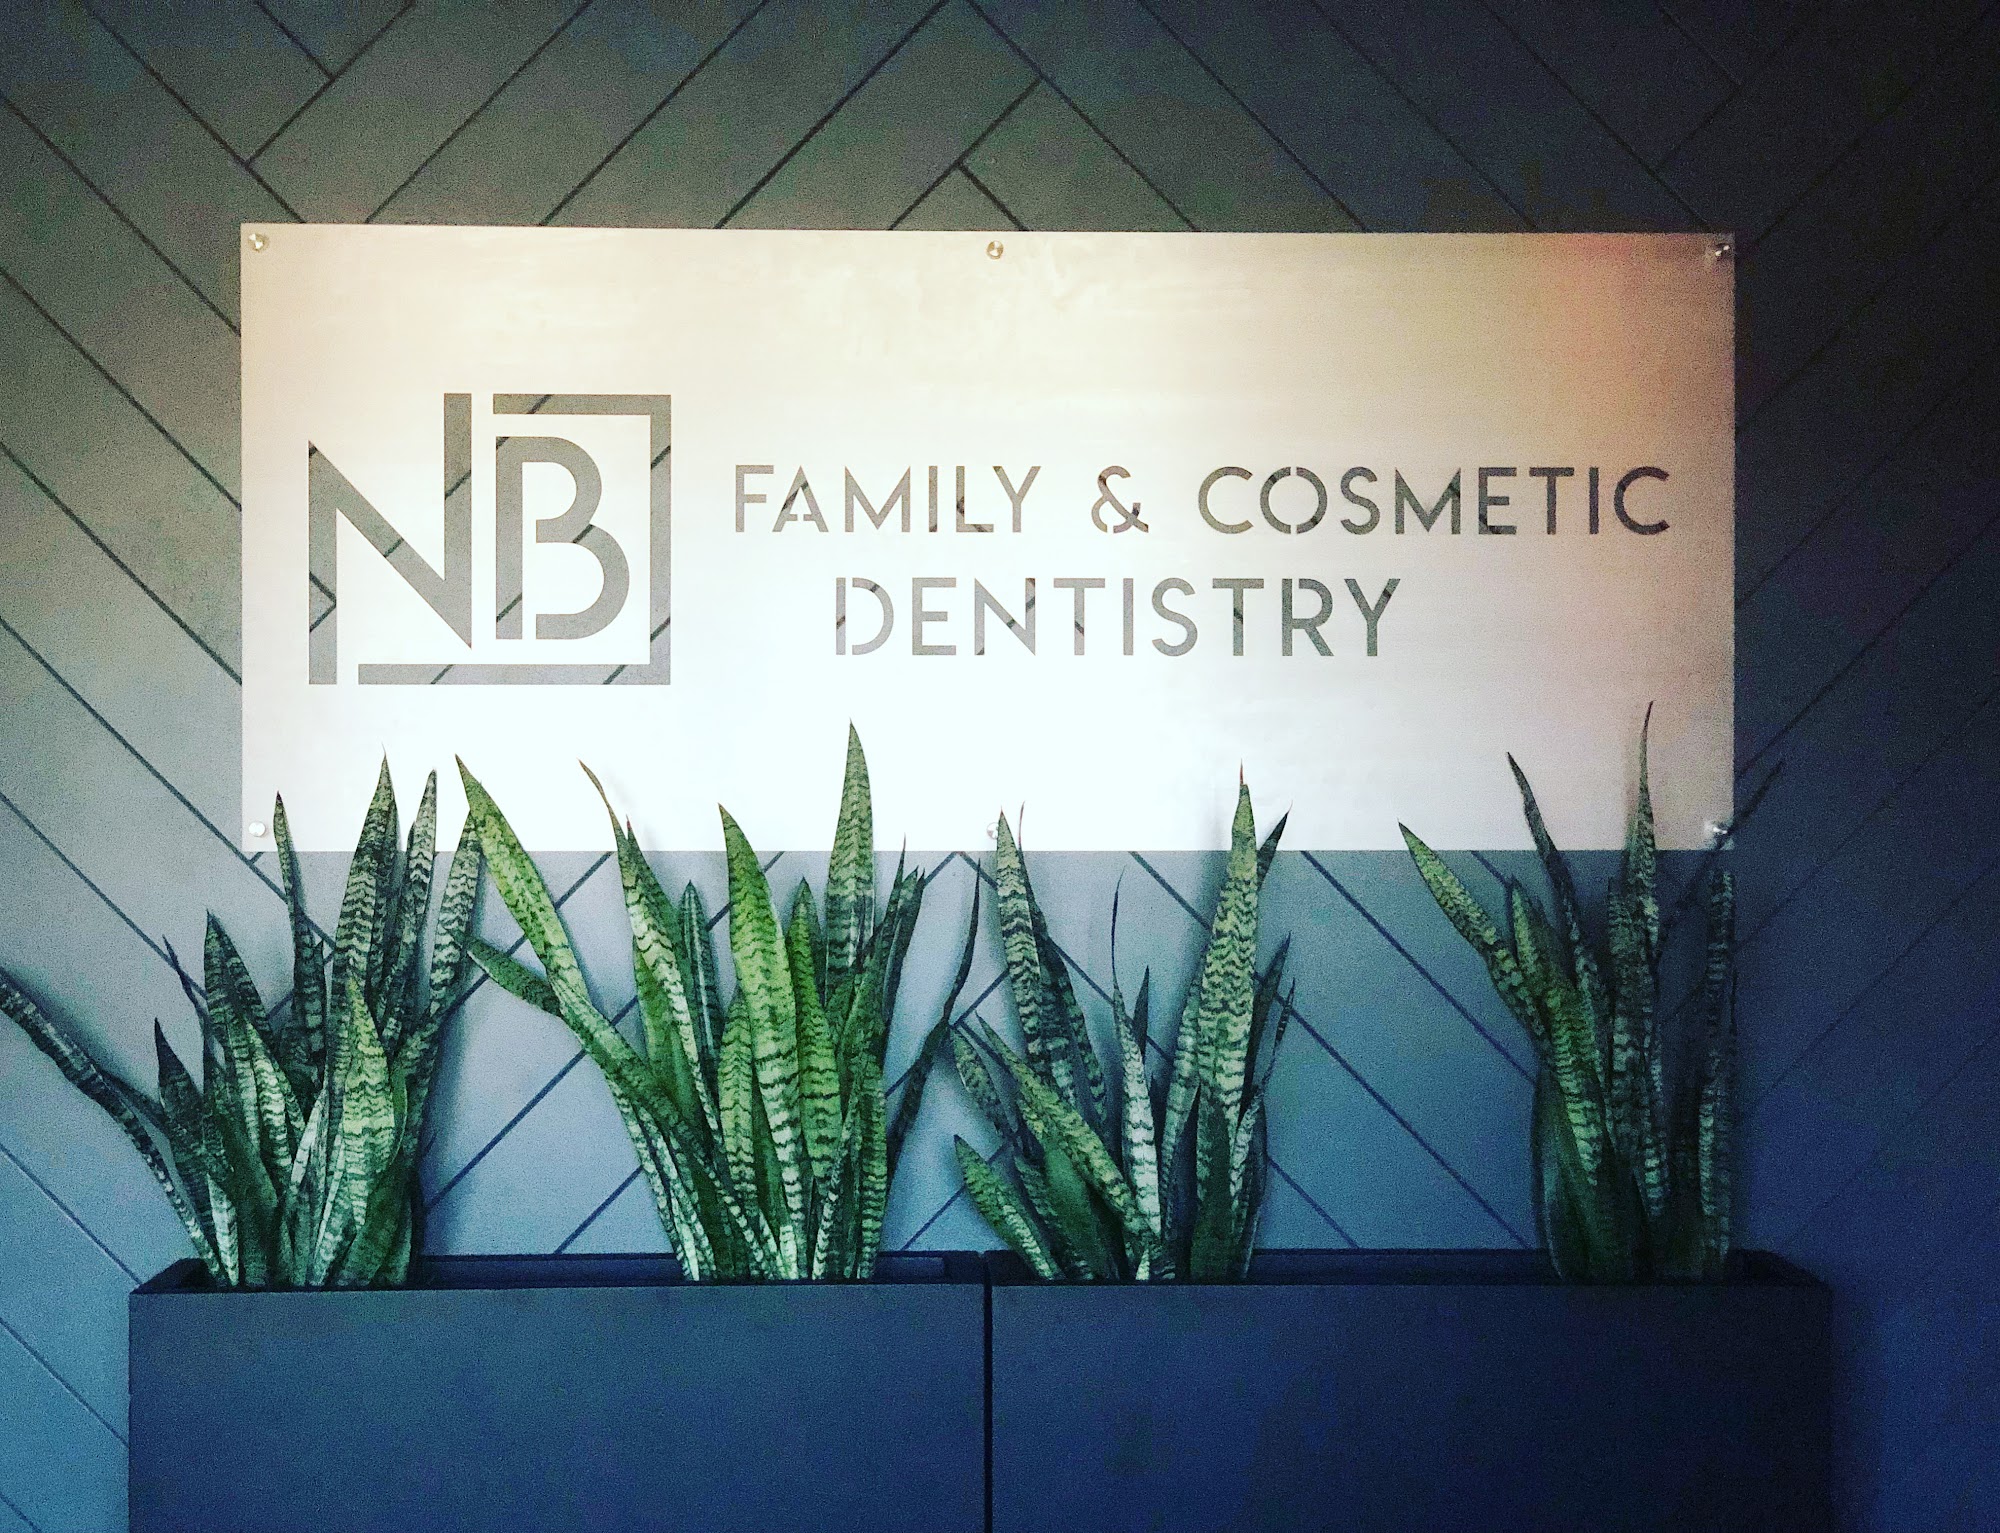 New Braunfels Family and Cosmetic Dentistry